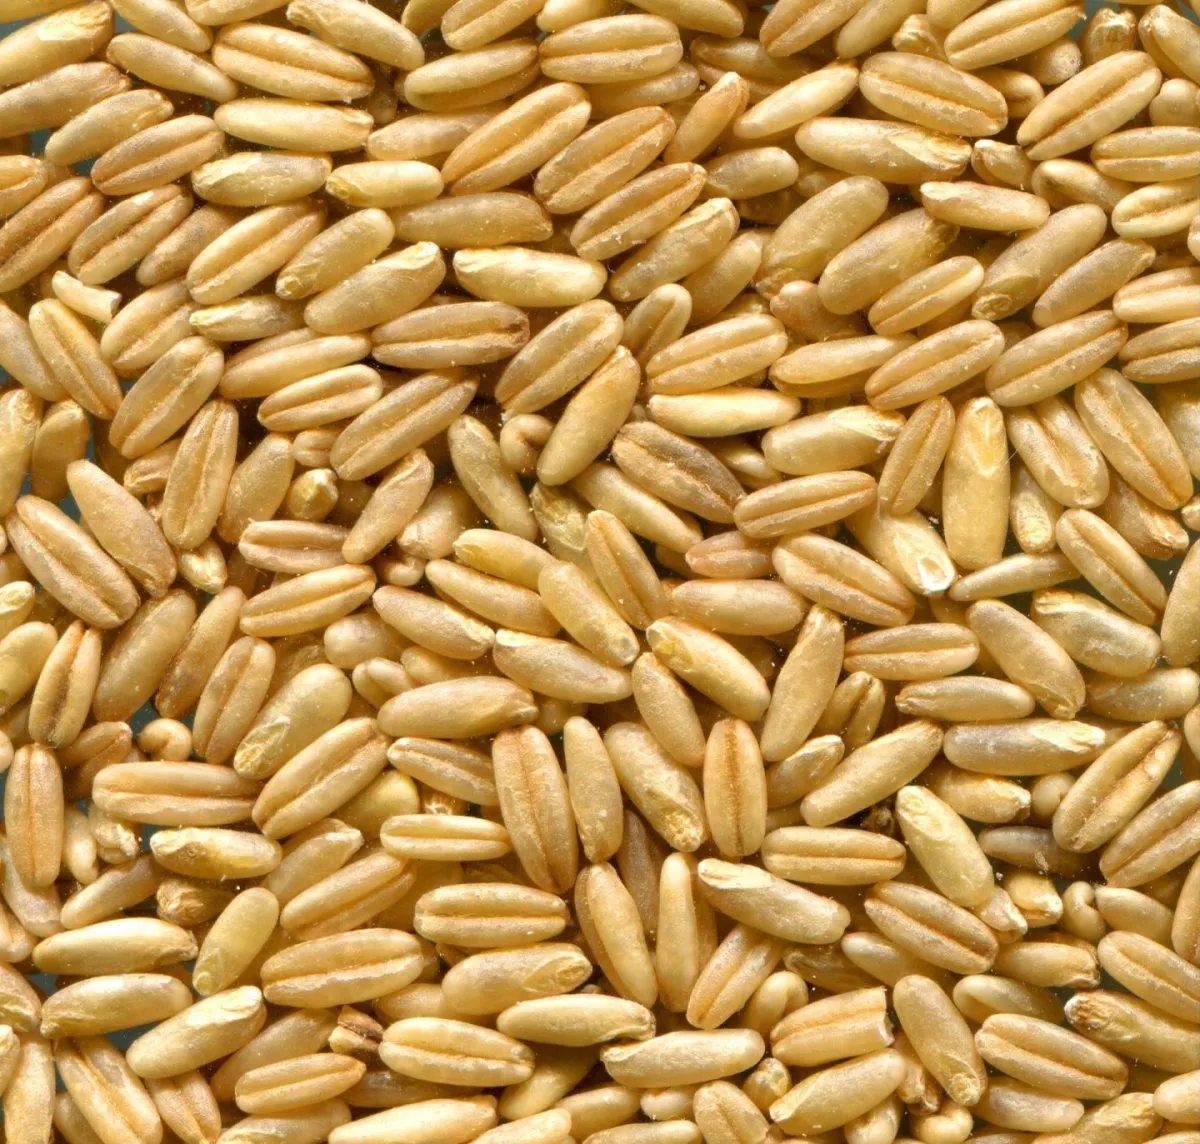 Can I feed straight oats?